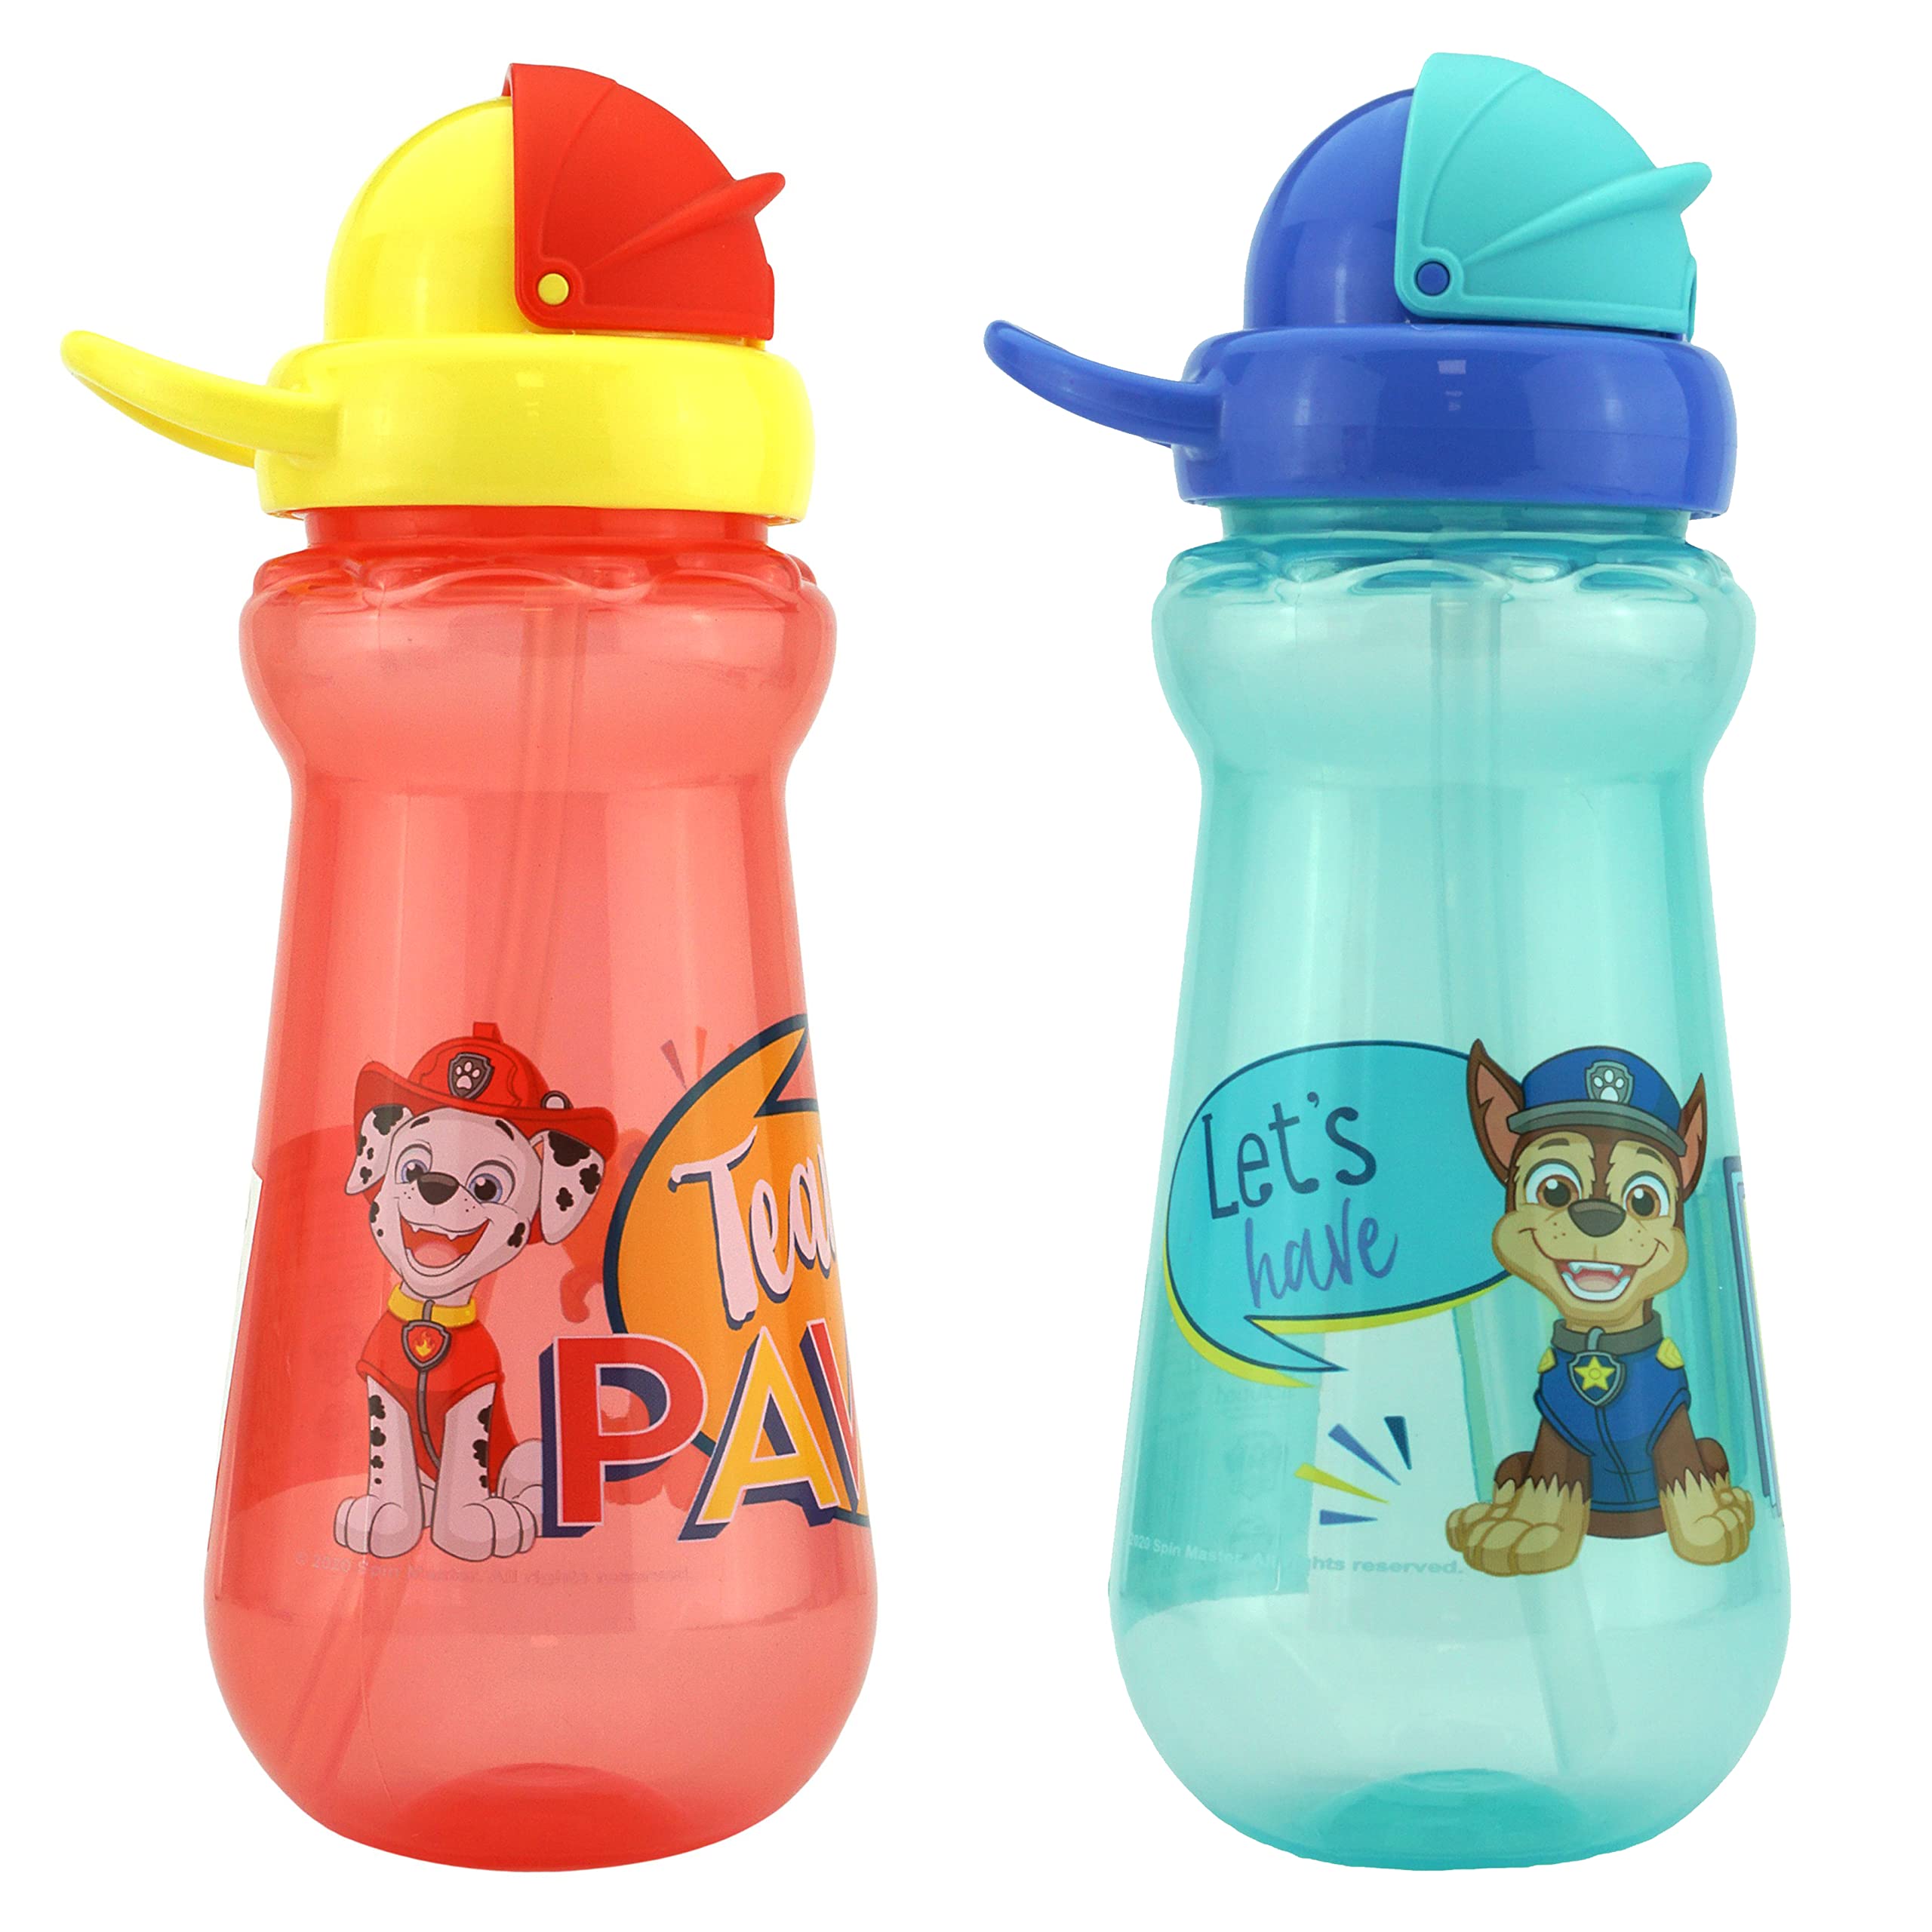 SRV Hub® 2x Paw Patrol Straw Sipper 340ml Plastic Water Bottles Blue and Red (Paw Patrol Chase and Marshall)